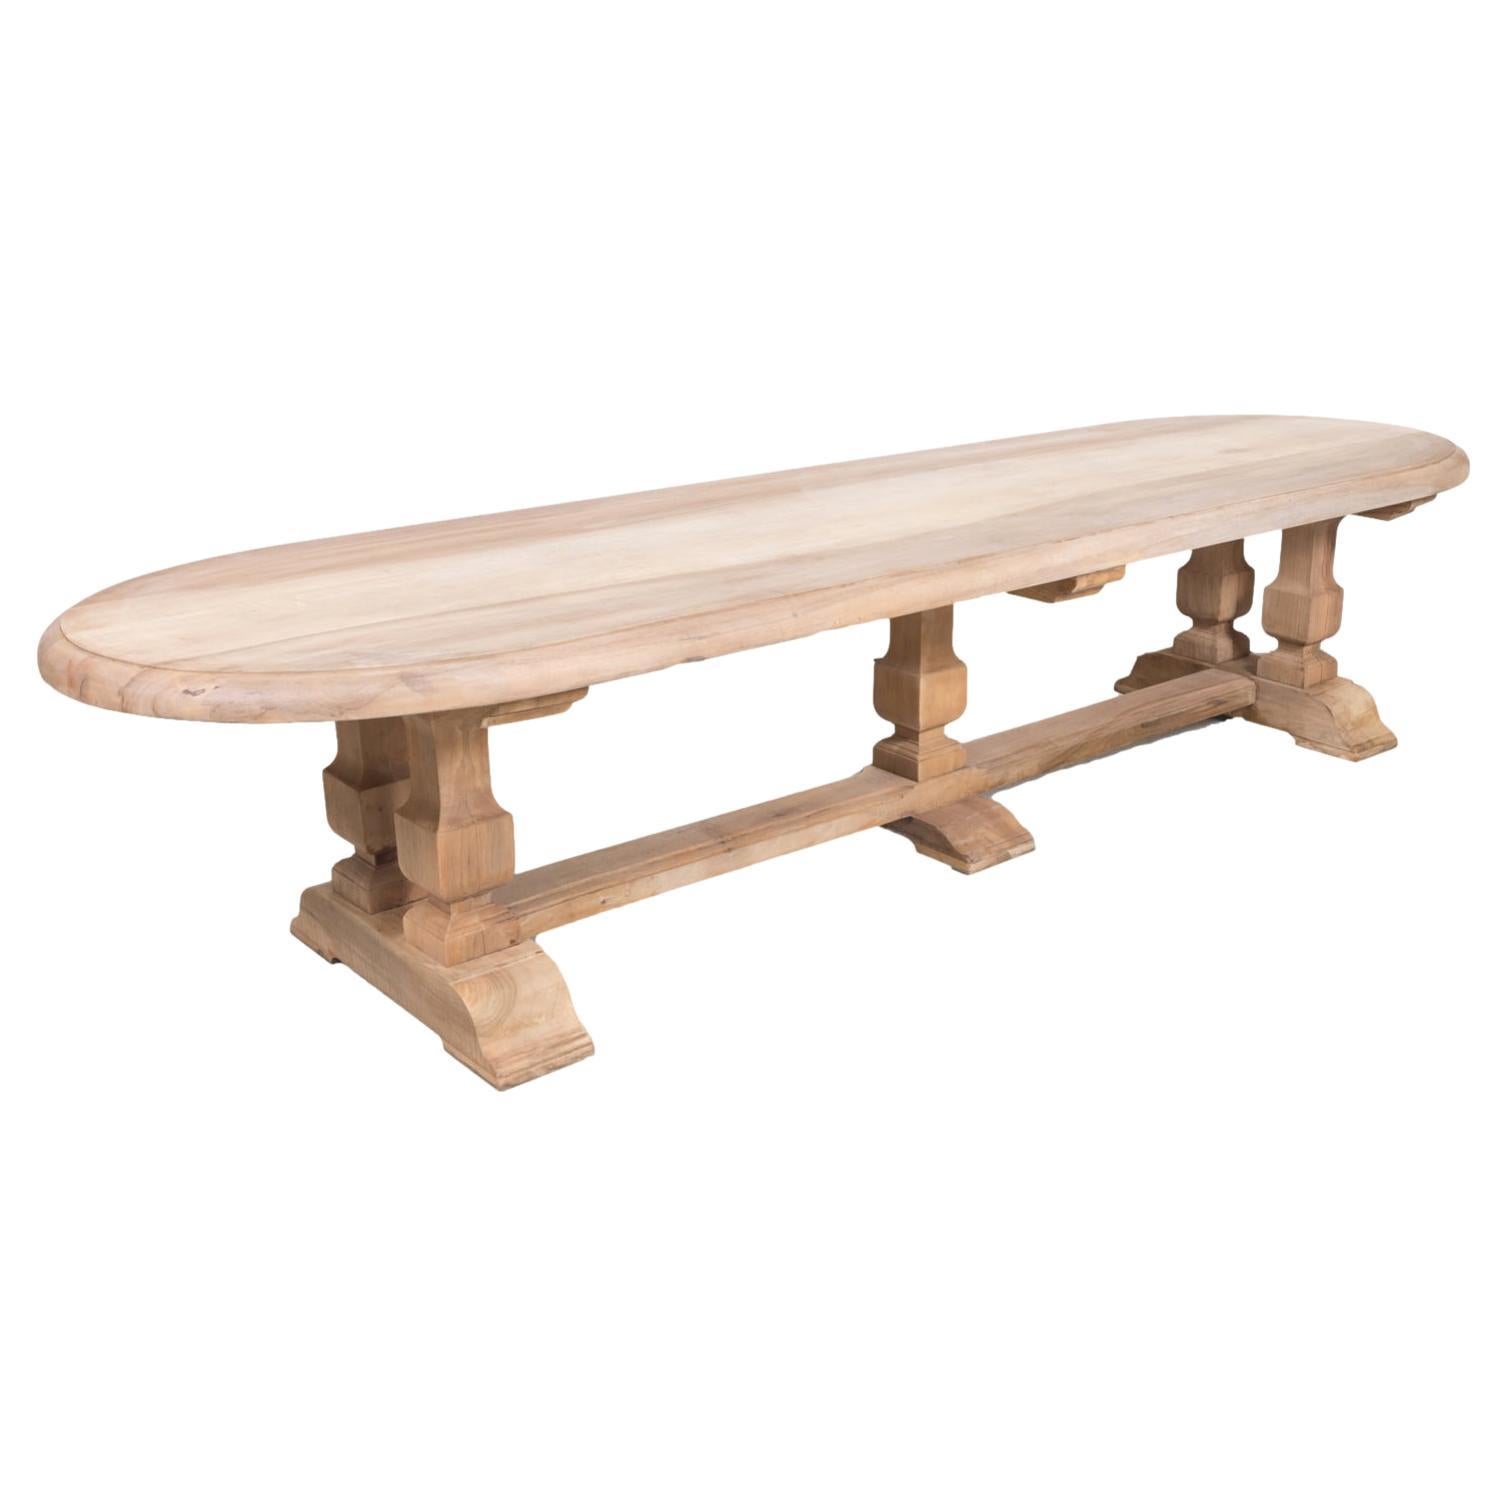 Impressive Antique French Bleached Walnut Trestle Dining Table with Rounded Ends